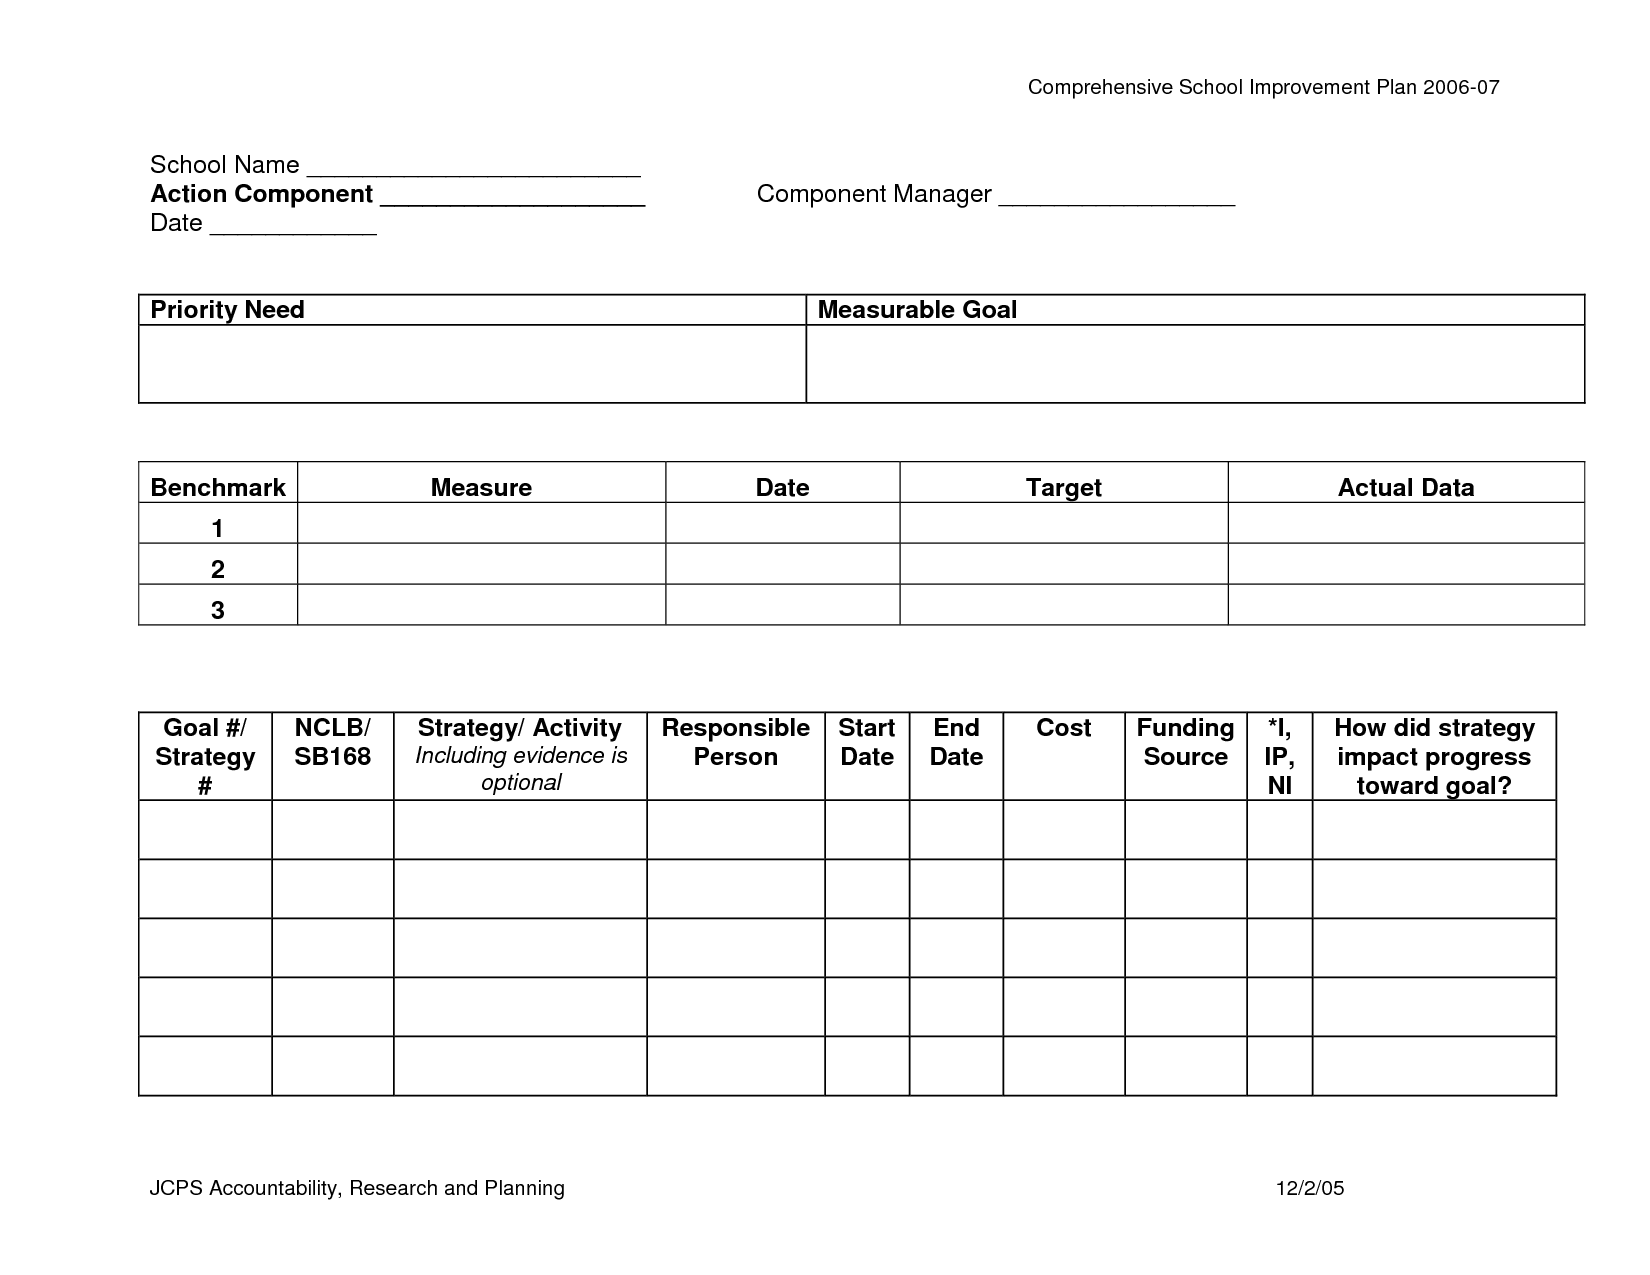 Blank Action Plan Template for Goals Image